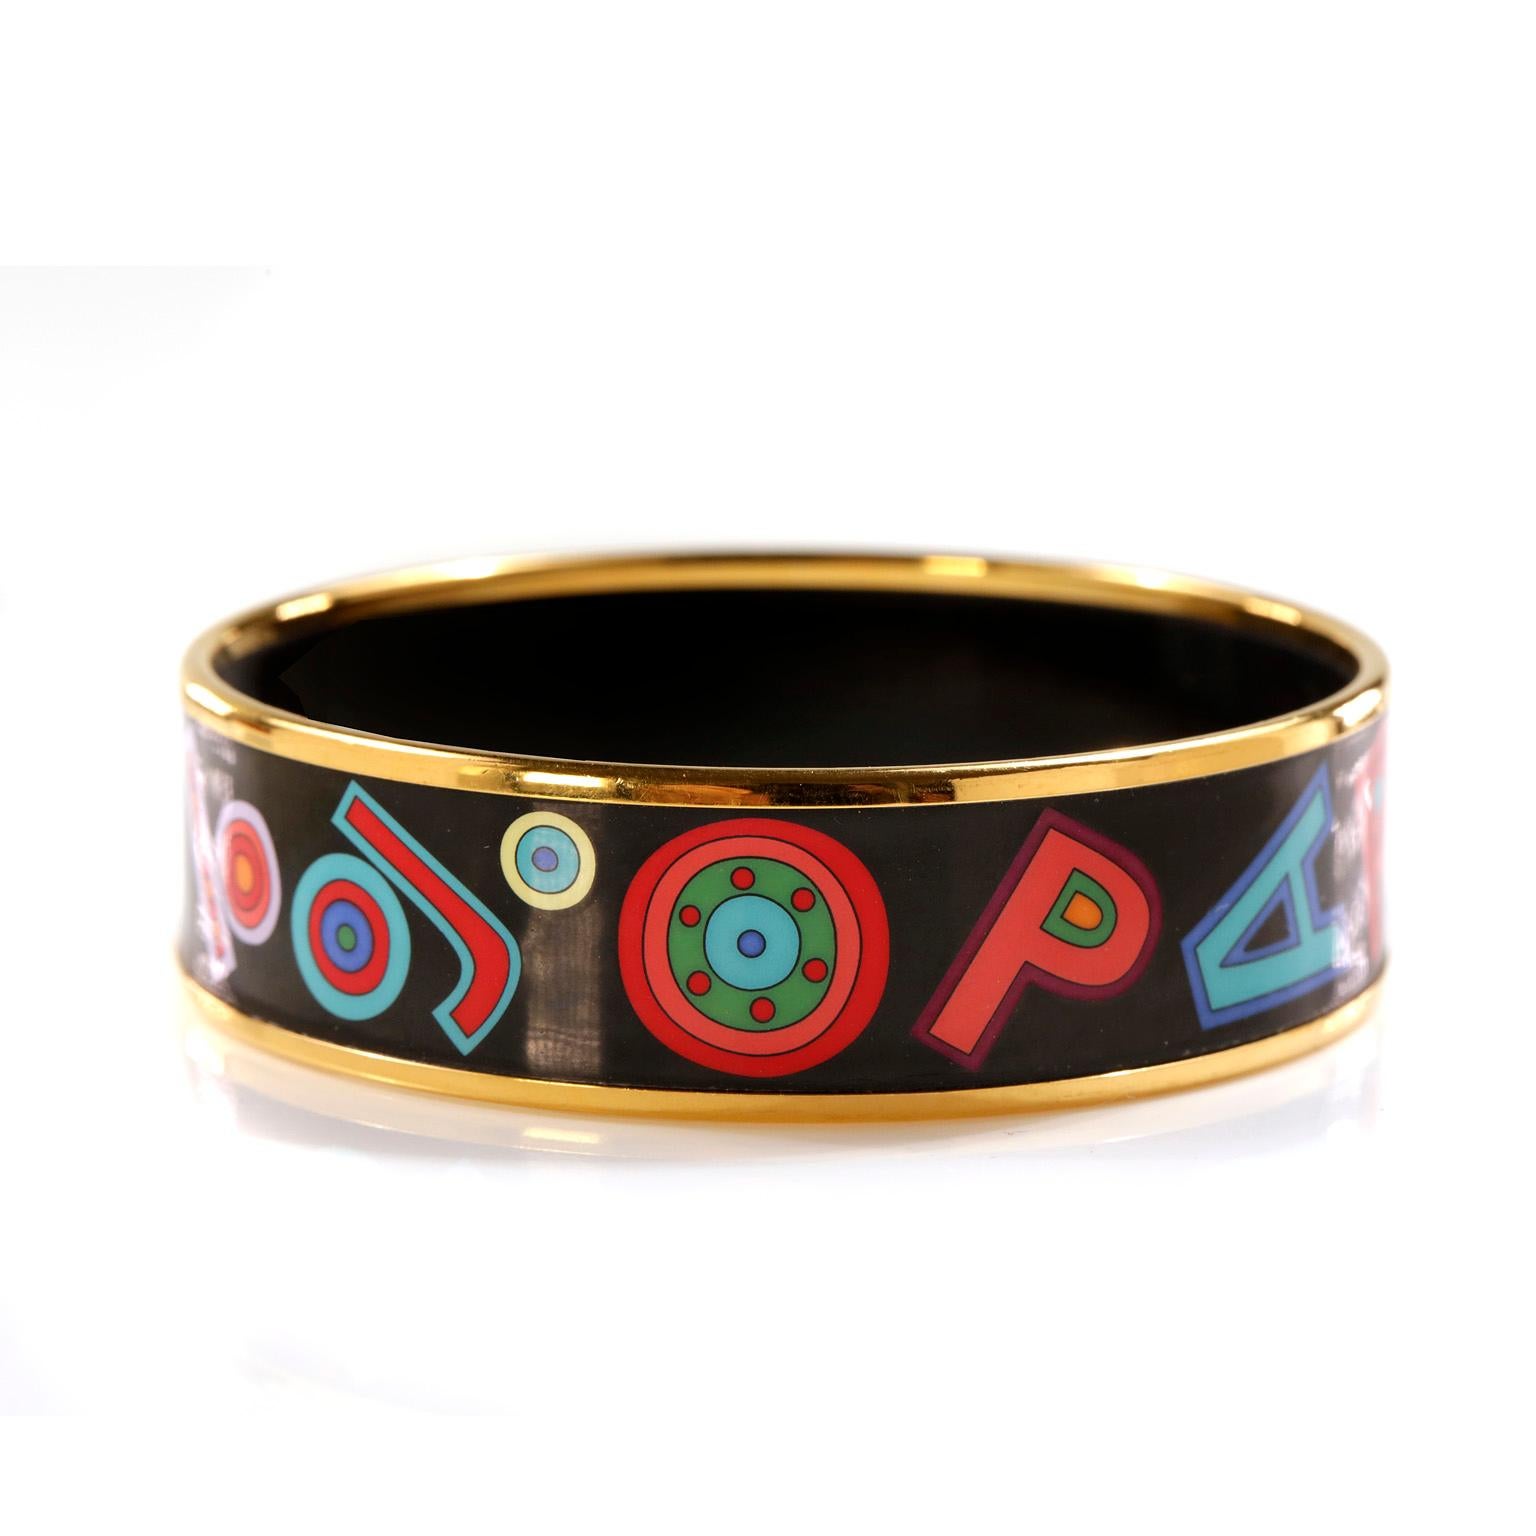 This authentic Hermès Black Enamel Tohu Bohu Bracelet is in excellent condition. 
Tohu Bohu (or Hurly Burly). Black background, gold plated edges and whimsical letter and number design depicts the abbreviation for the Hermès store address in Paris. 